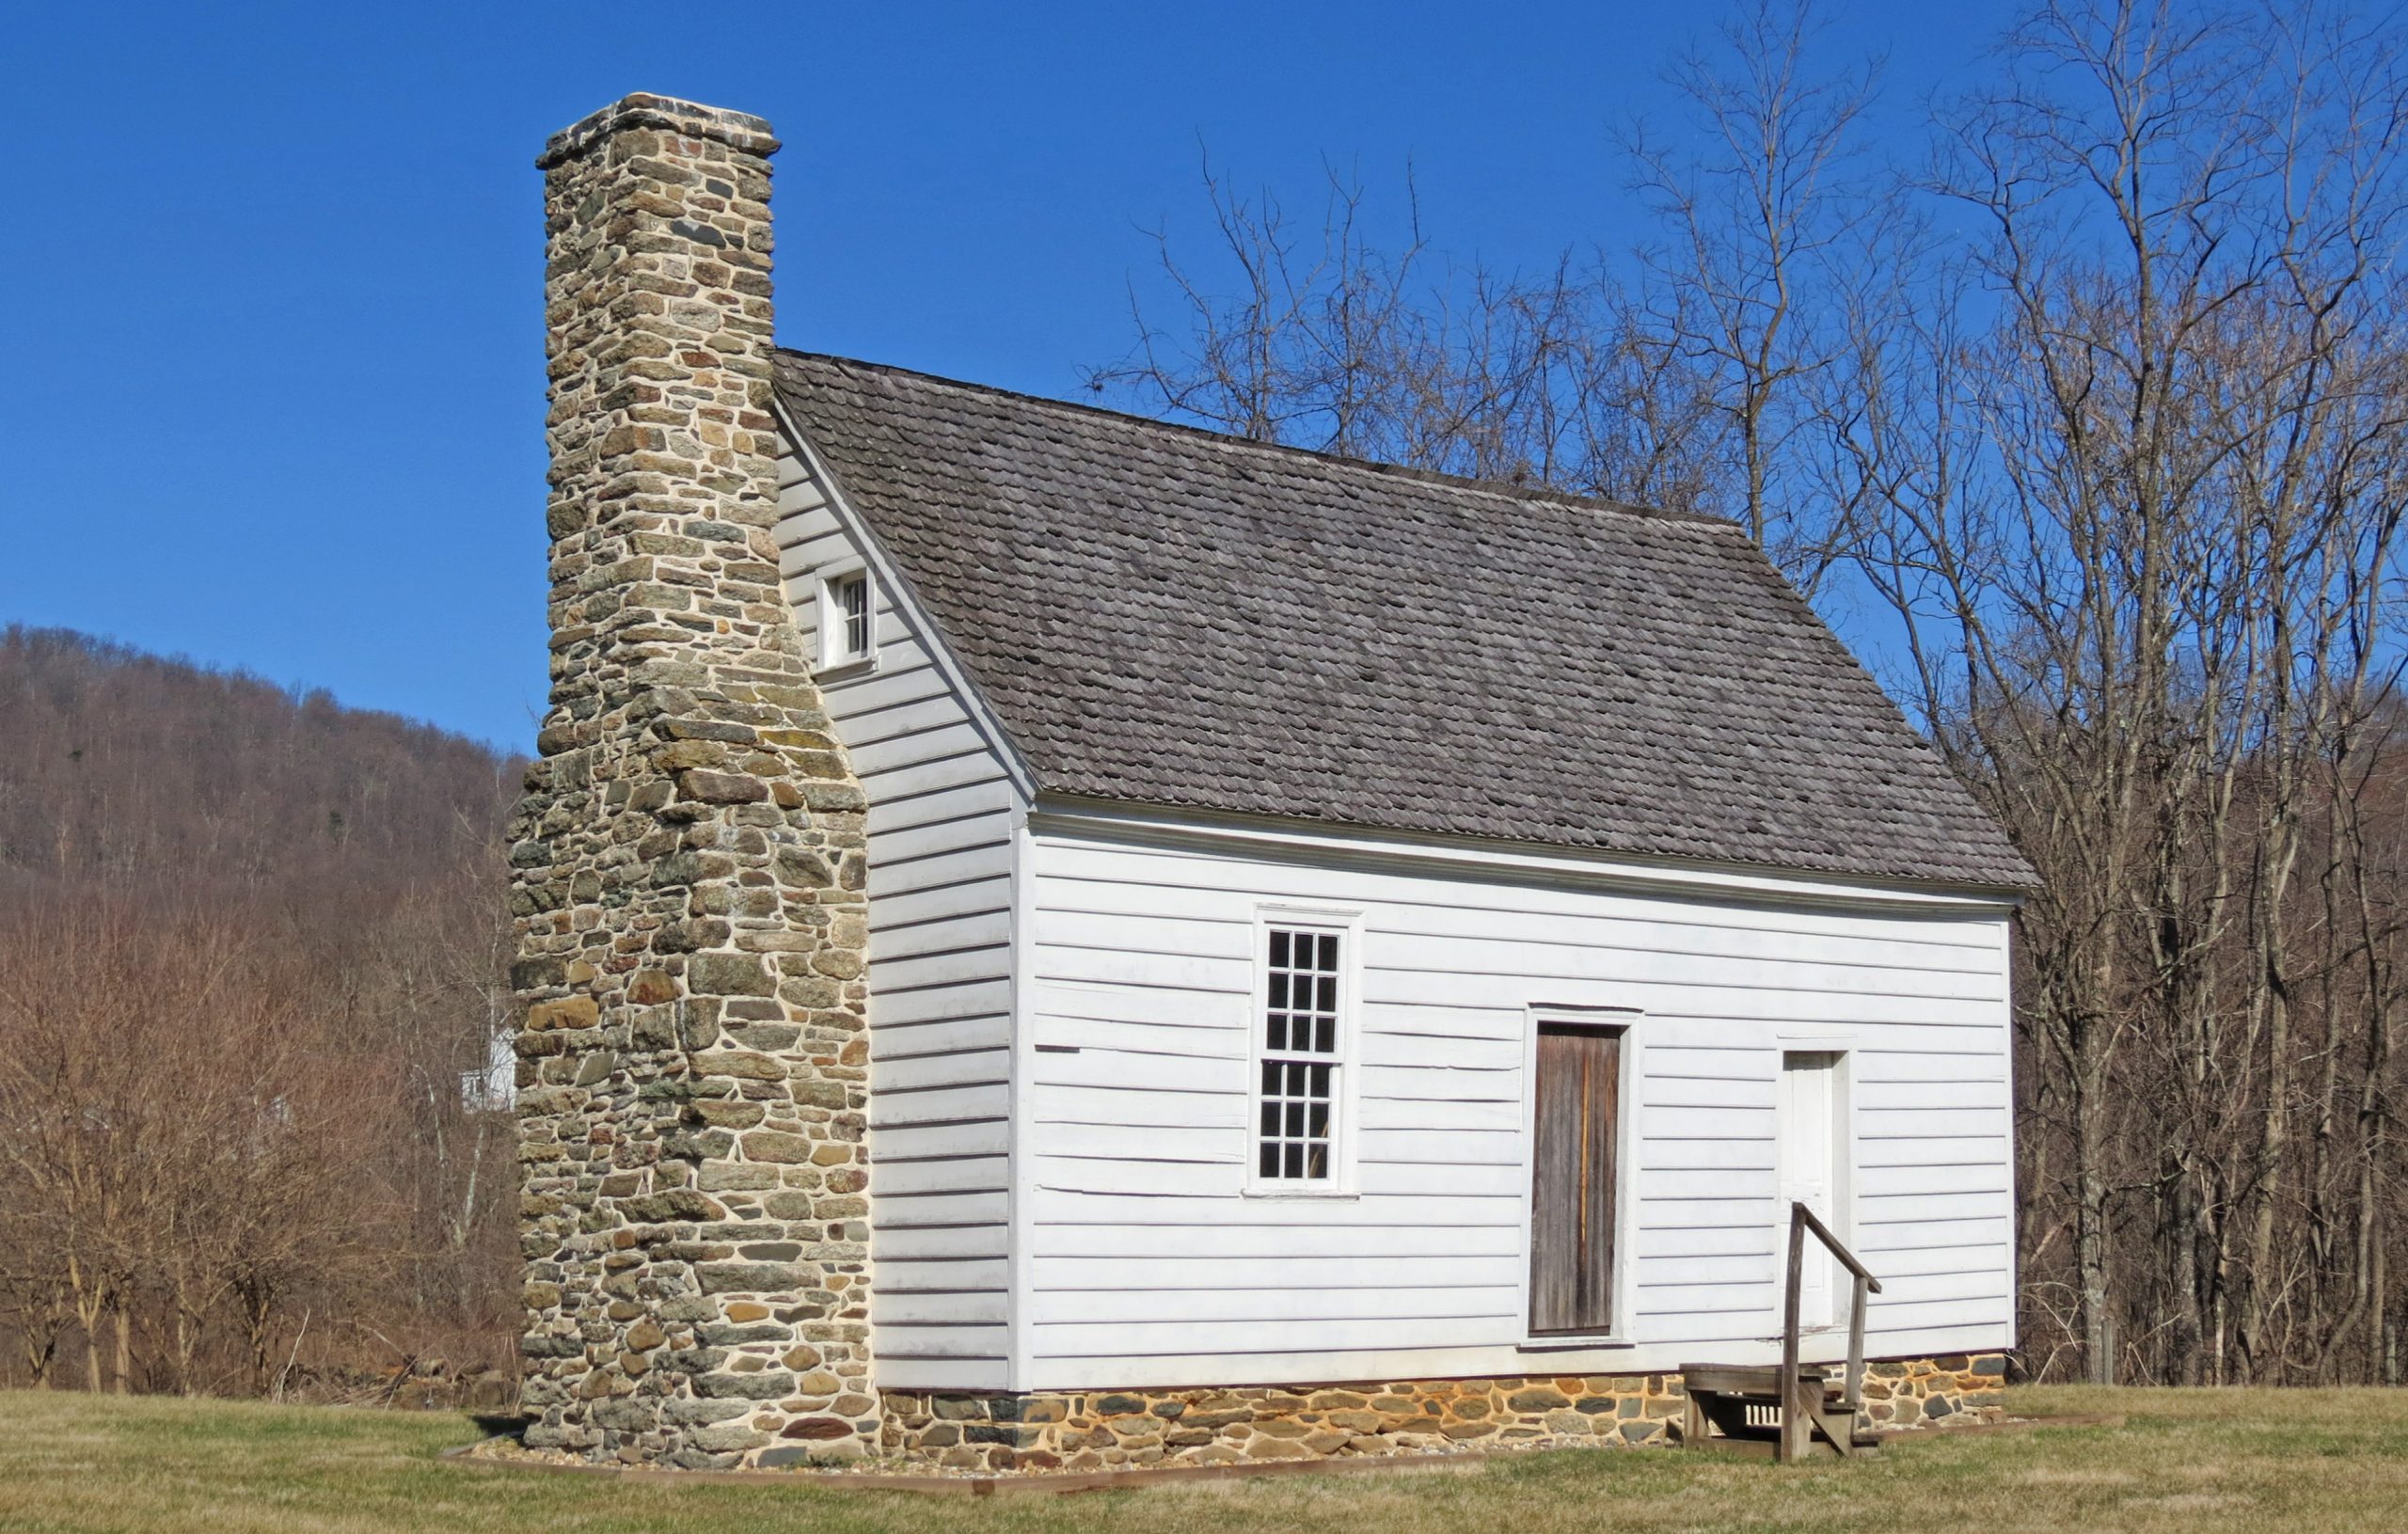 The Hollow Historic Dwelling